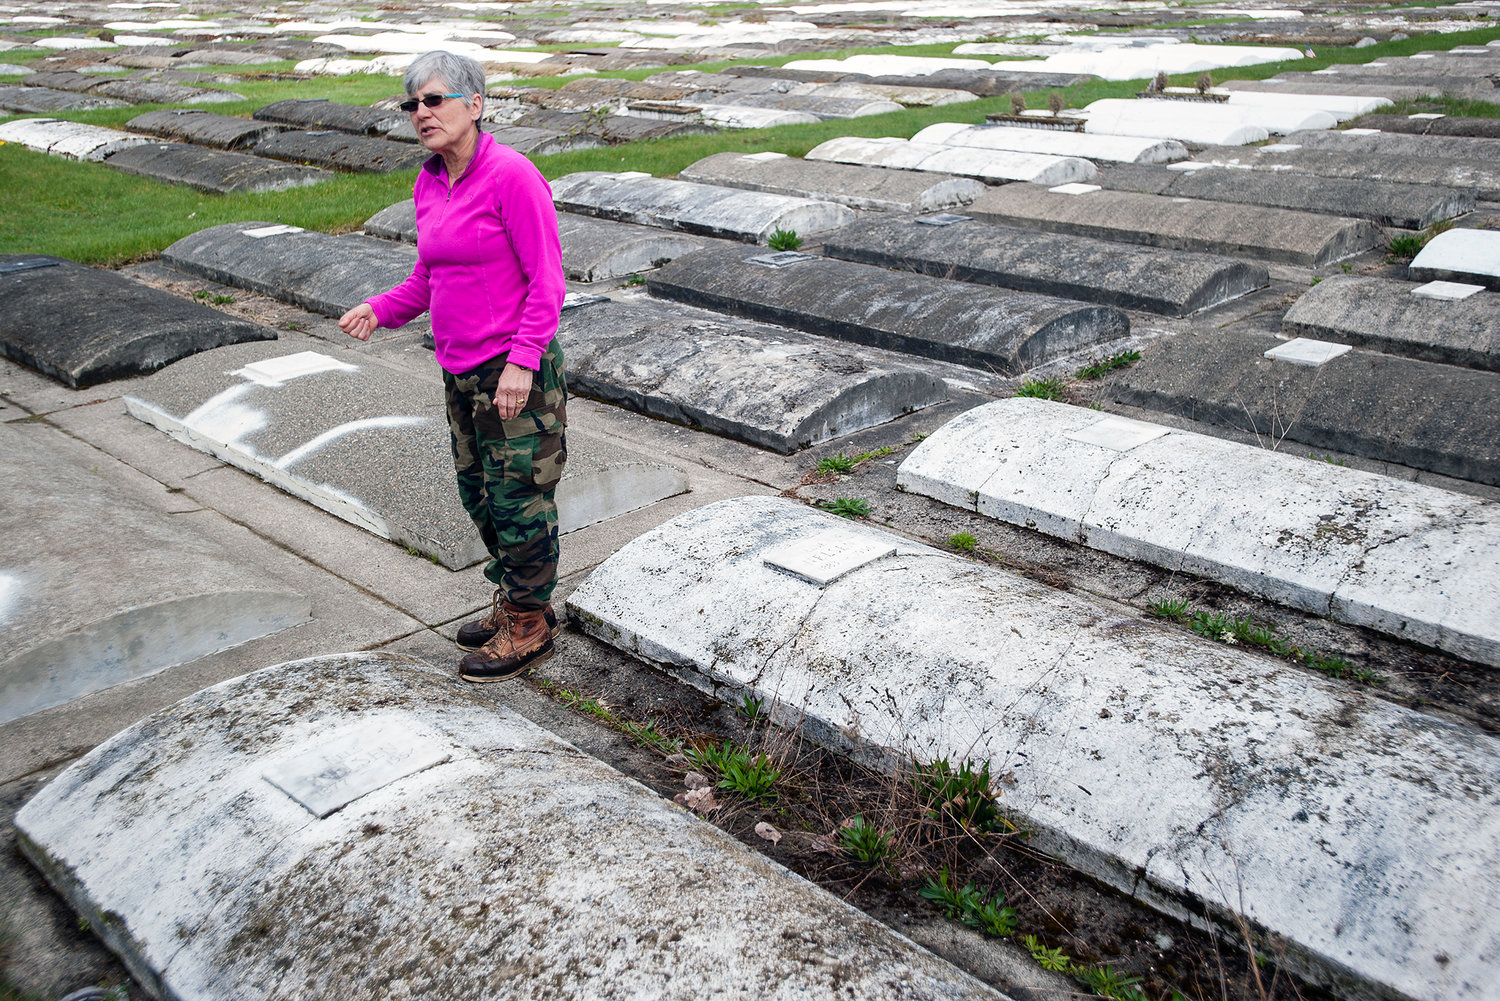 Jennifer Duncan, former caretaker at Greenwood Cemetery, stands amid rows of surface burial vaults in this photograph taken in April 2014 at the Centralia cemetery.